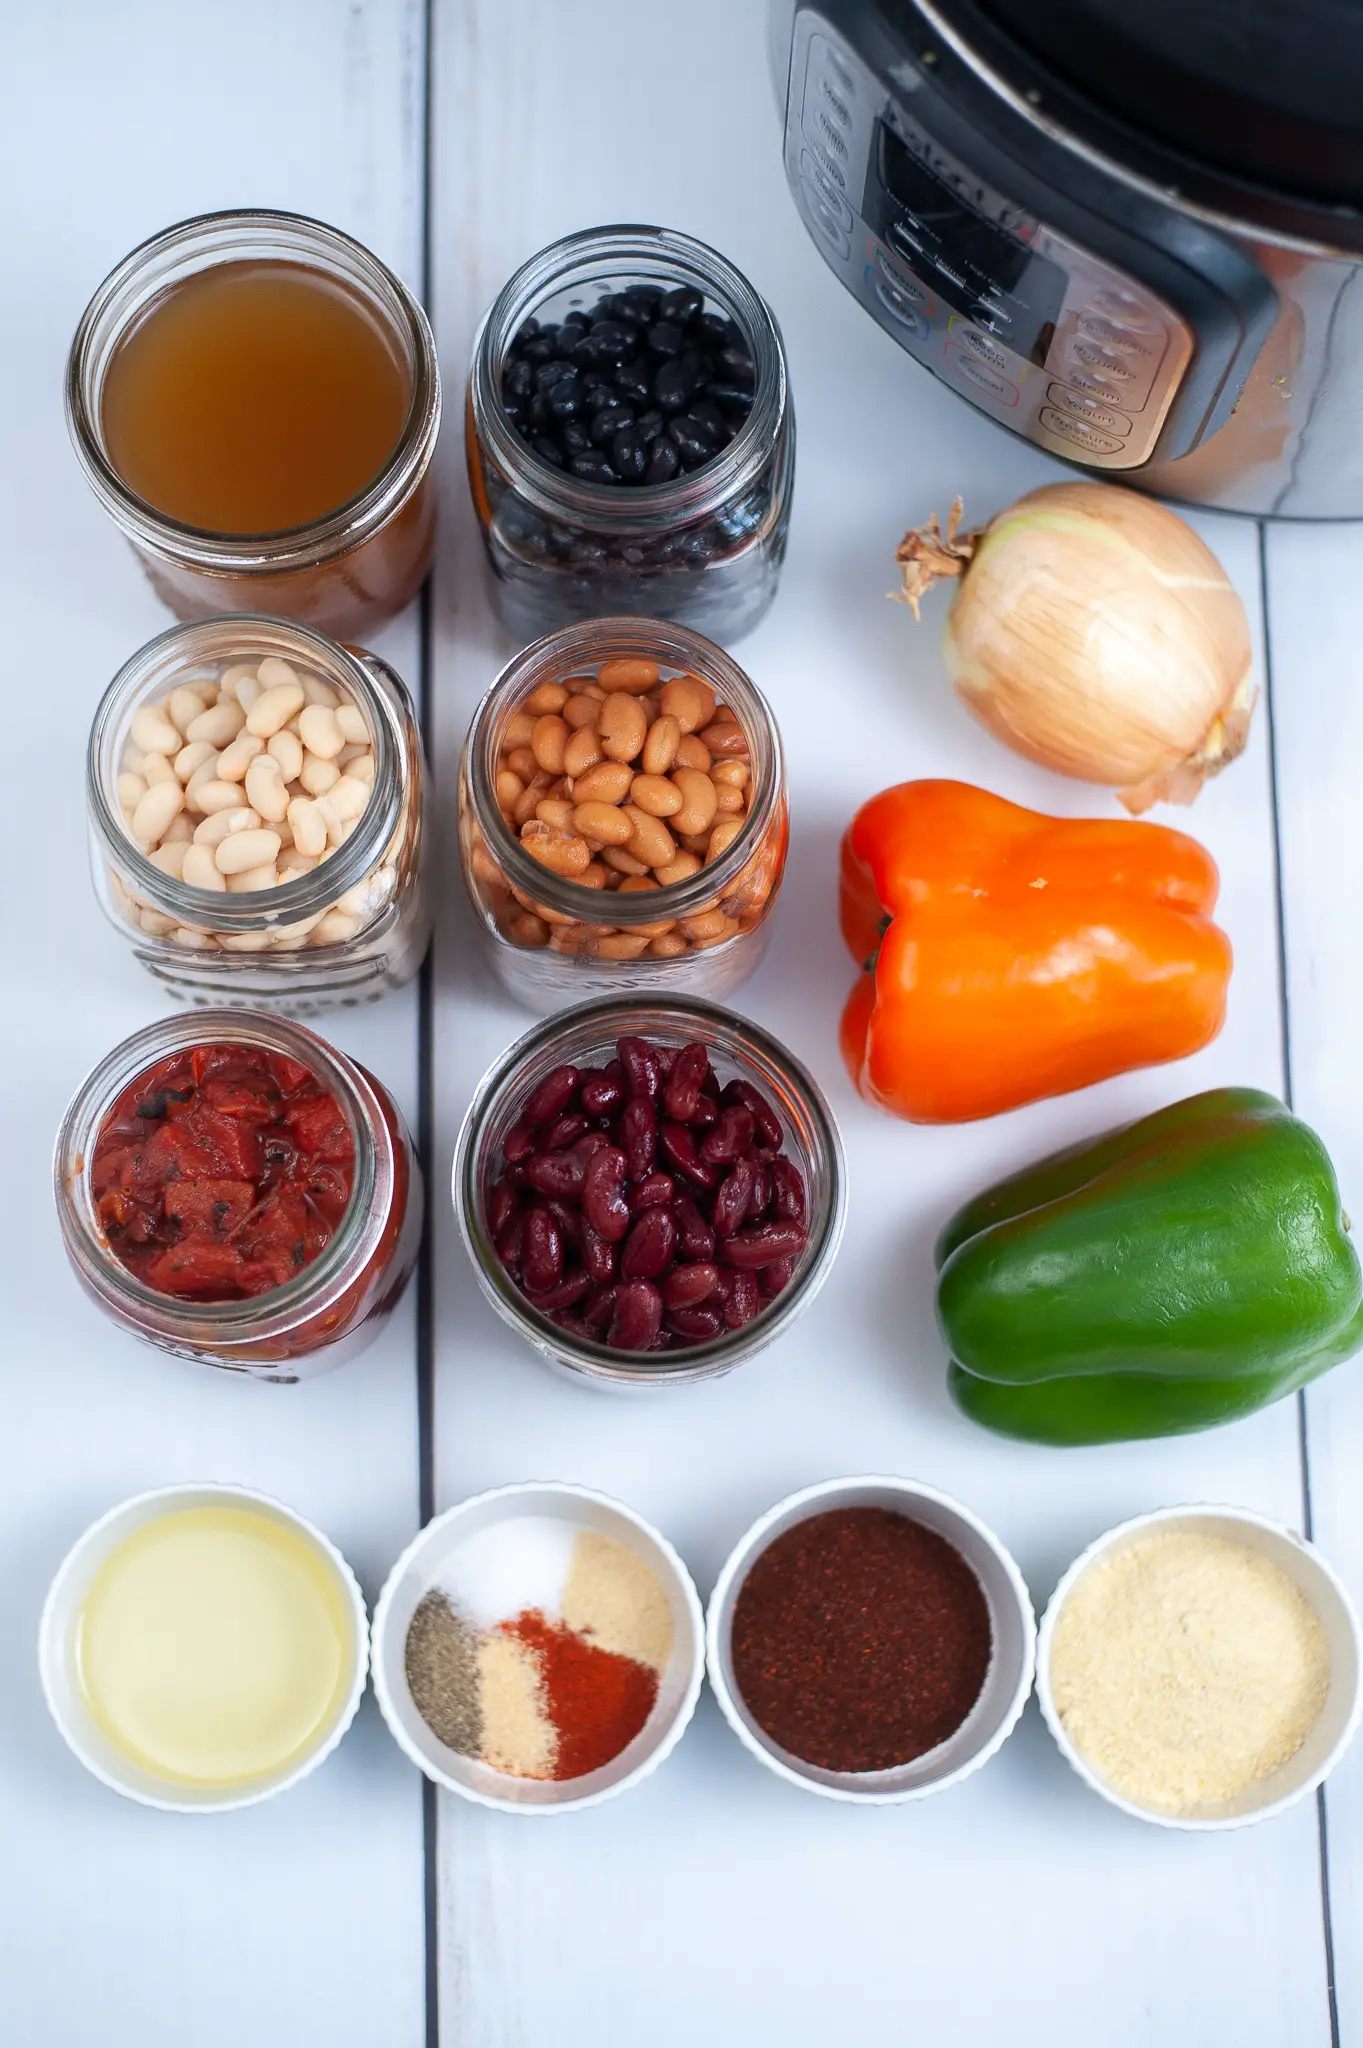 Ingredients for Instant Pot Vegetarian Chili.